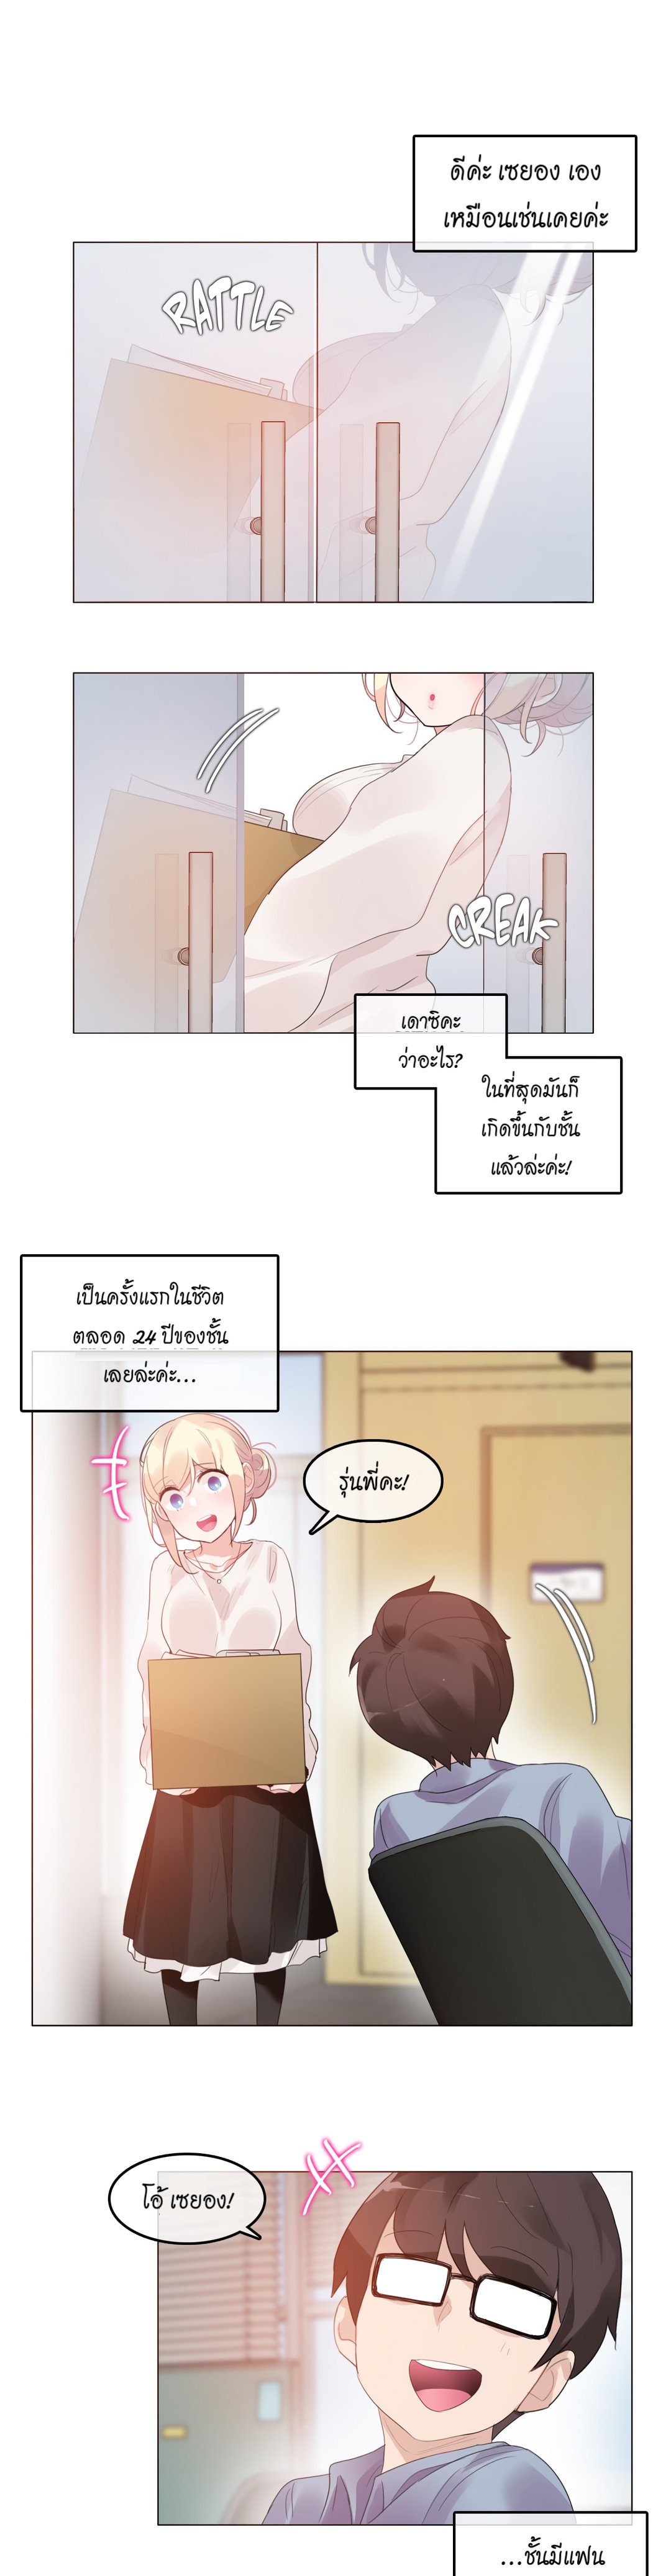 A Pervert’s Daily Life 56 01